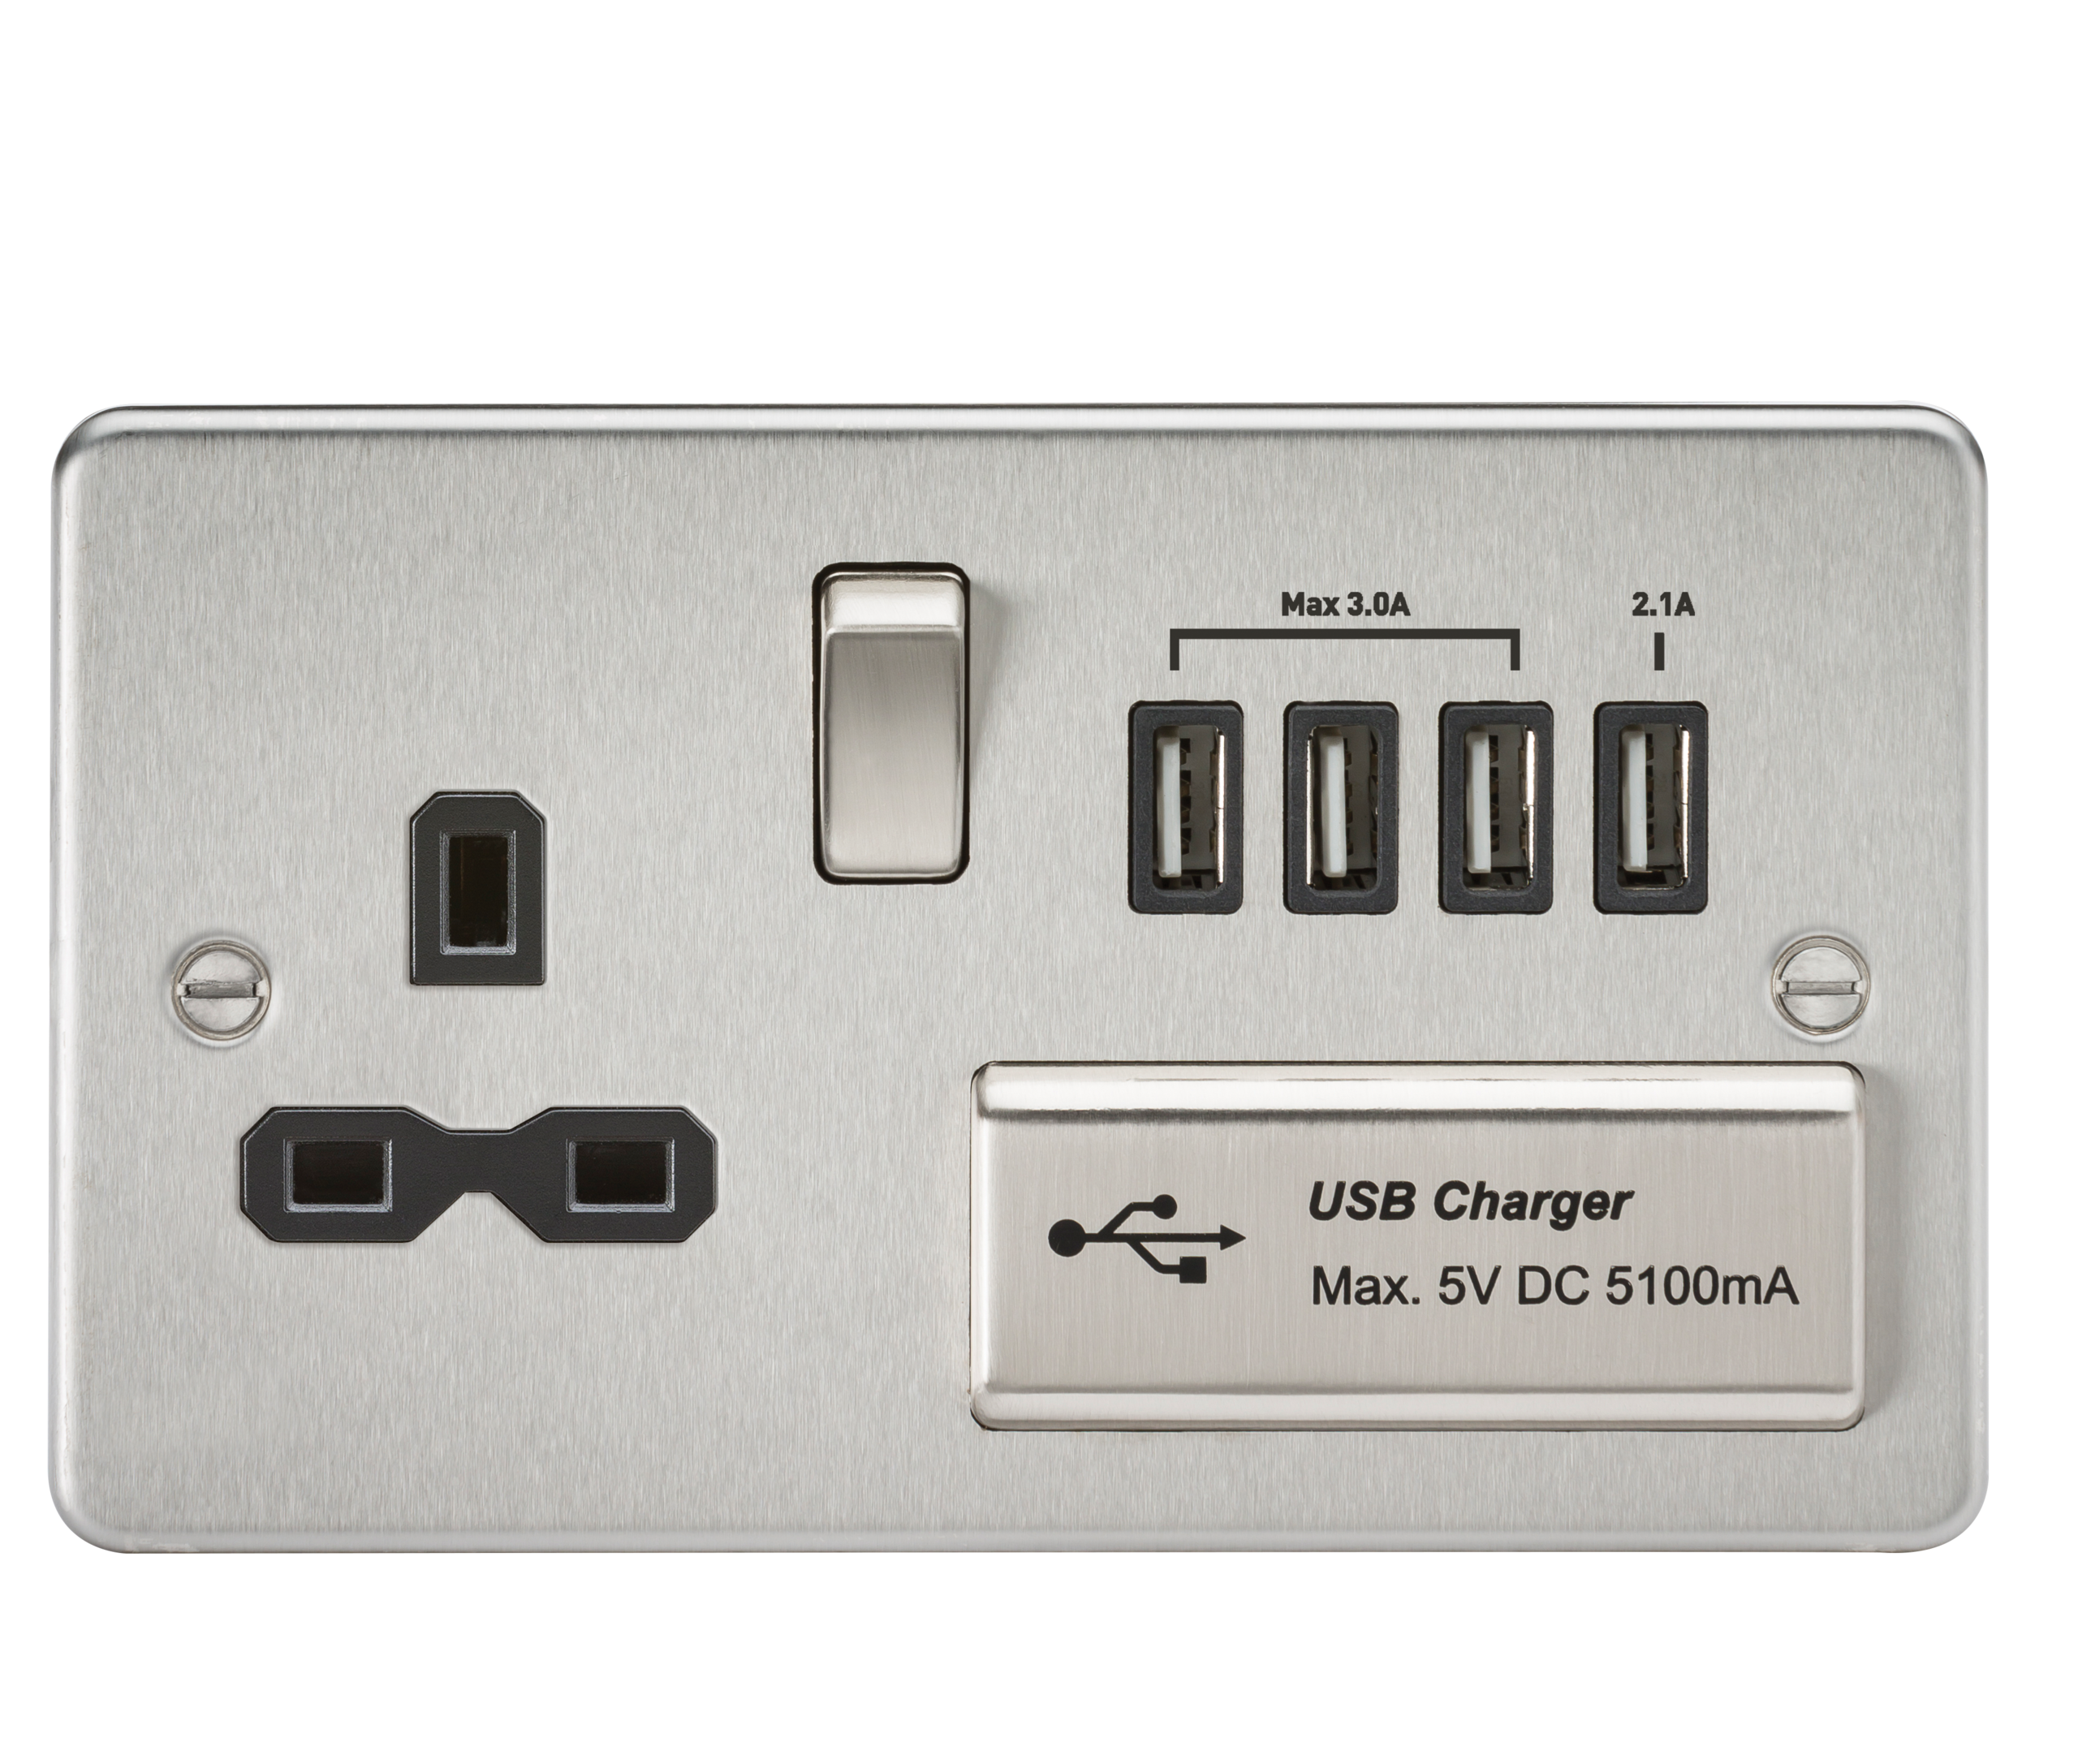 Flat Plate 13A Switched Socket With Quad USB Charger - Brushed Chrome With Black Insert - FPR7USB4BC 